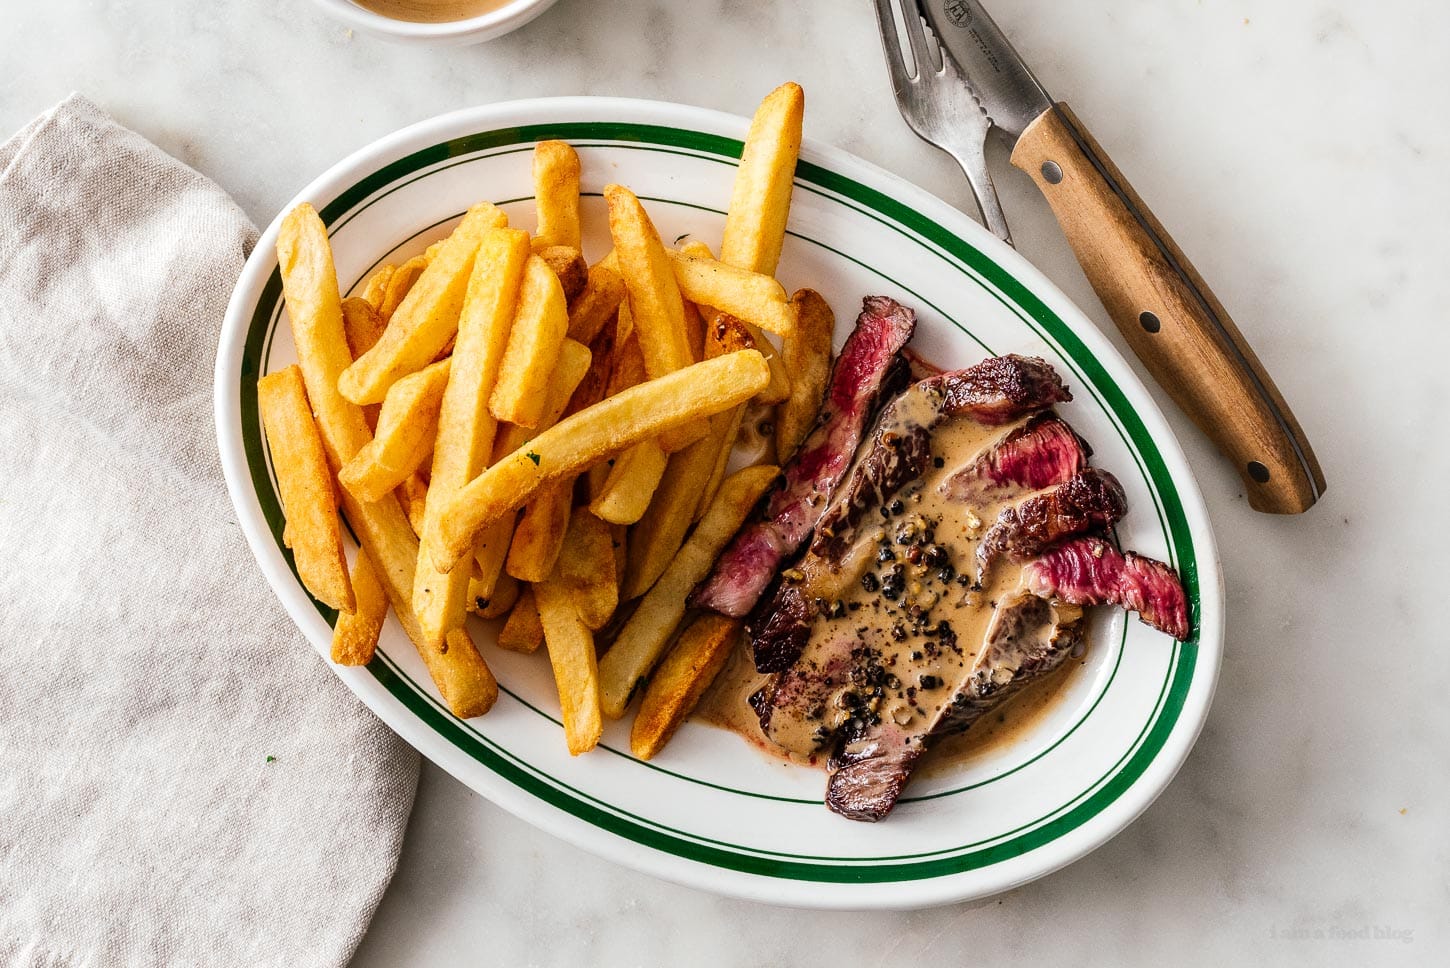 The 8 Best Steak Sauce Recipes to Serve with Your Weeknight Steak Frites